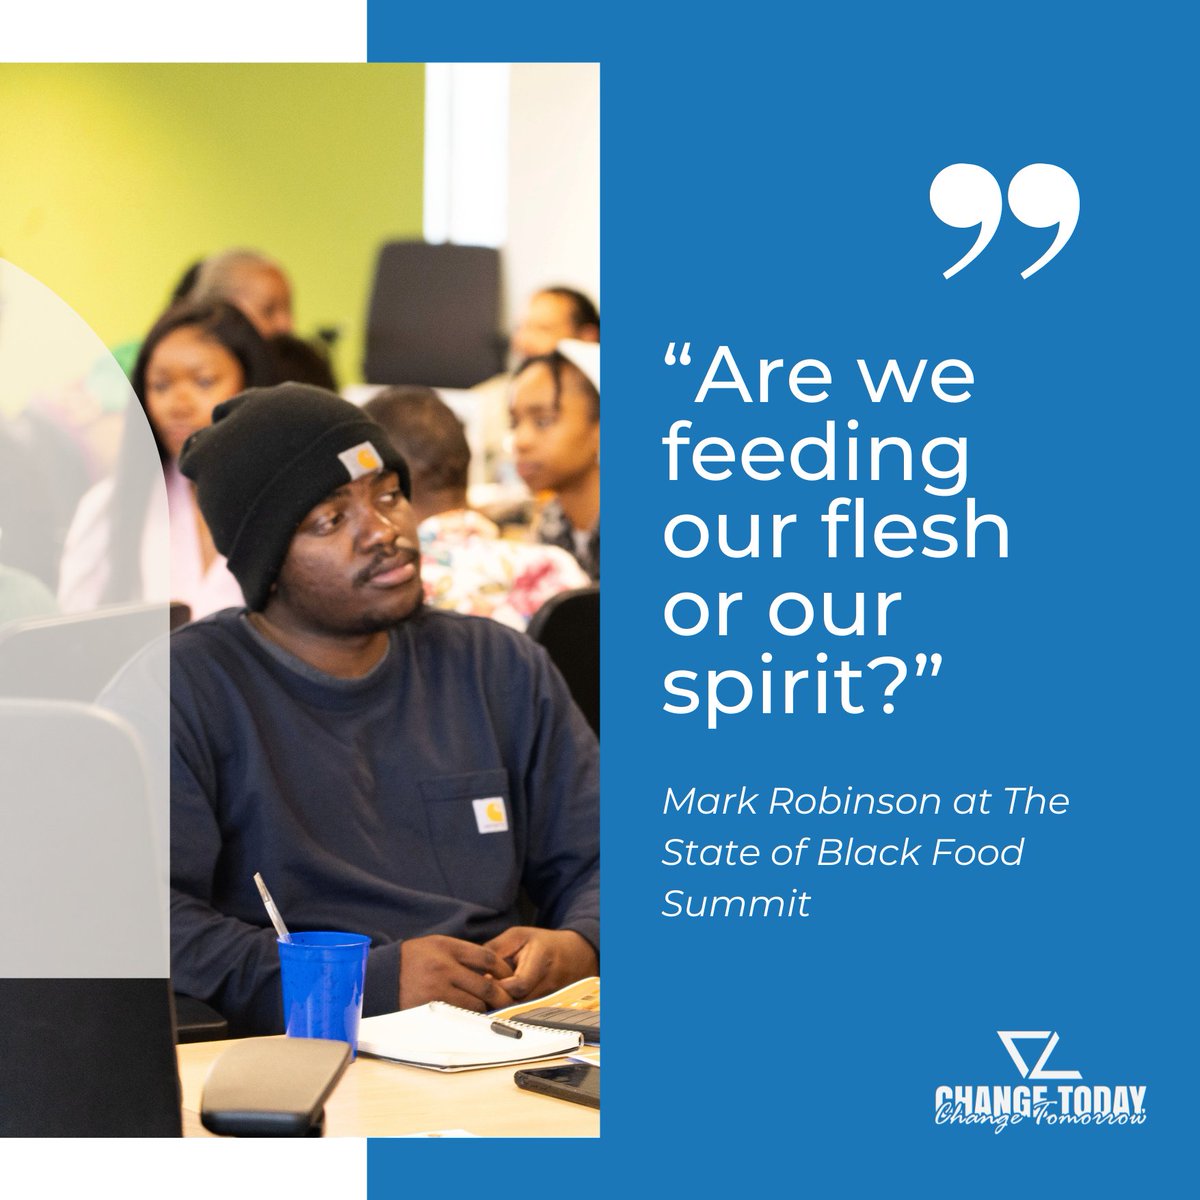 There were so many inspiring moments at The State of Black Food Summit. 'Are we feeding our flesh or our spirit?' Mark Robinson challenged us to think deeper about what we consume. Let's continue this important conversation and work towards a healthier future for all.